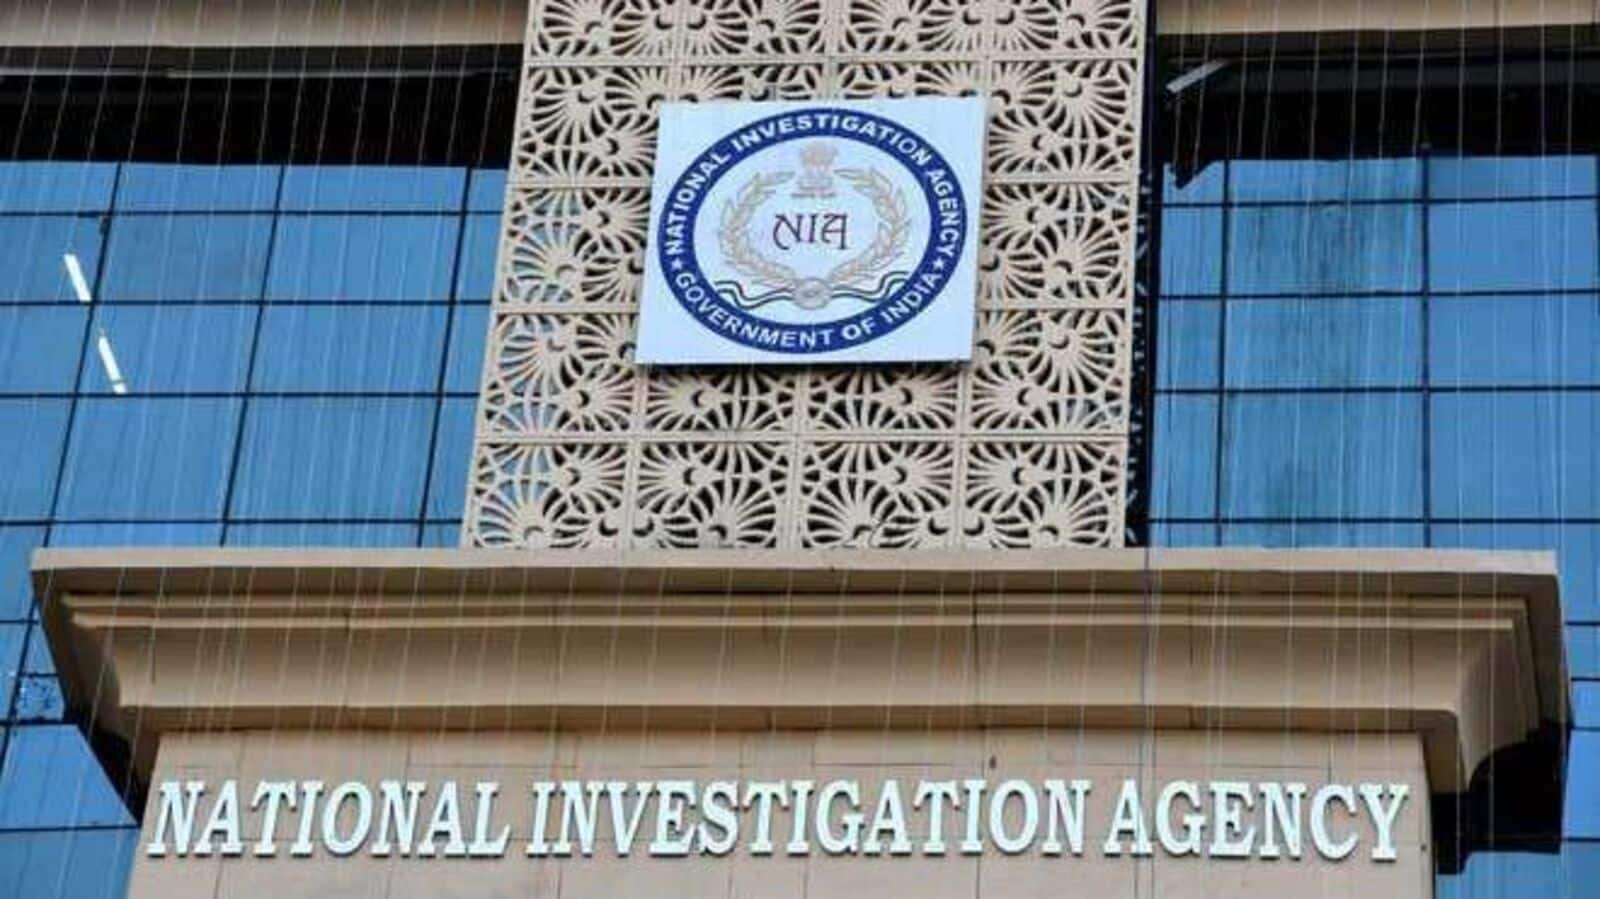 6 people were arrested by NIA while gangster terrorist nexus raids. - Asiana Times